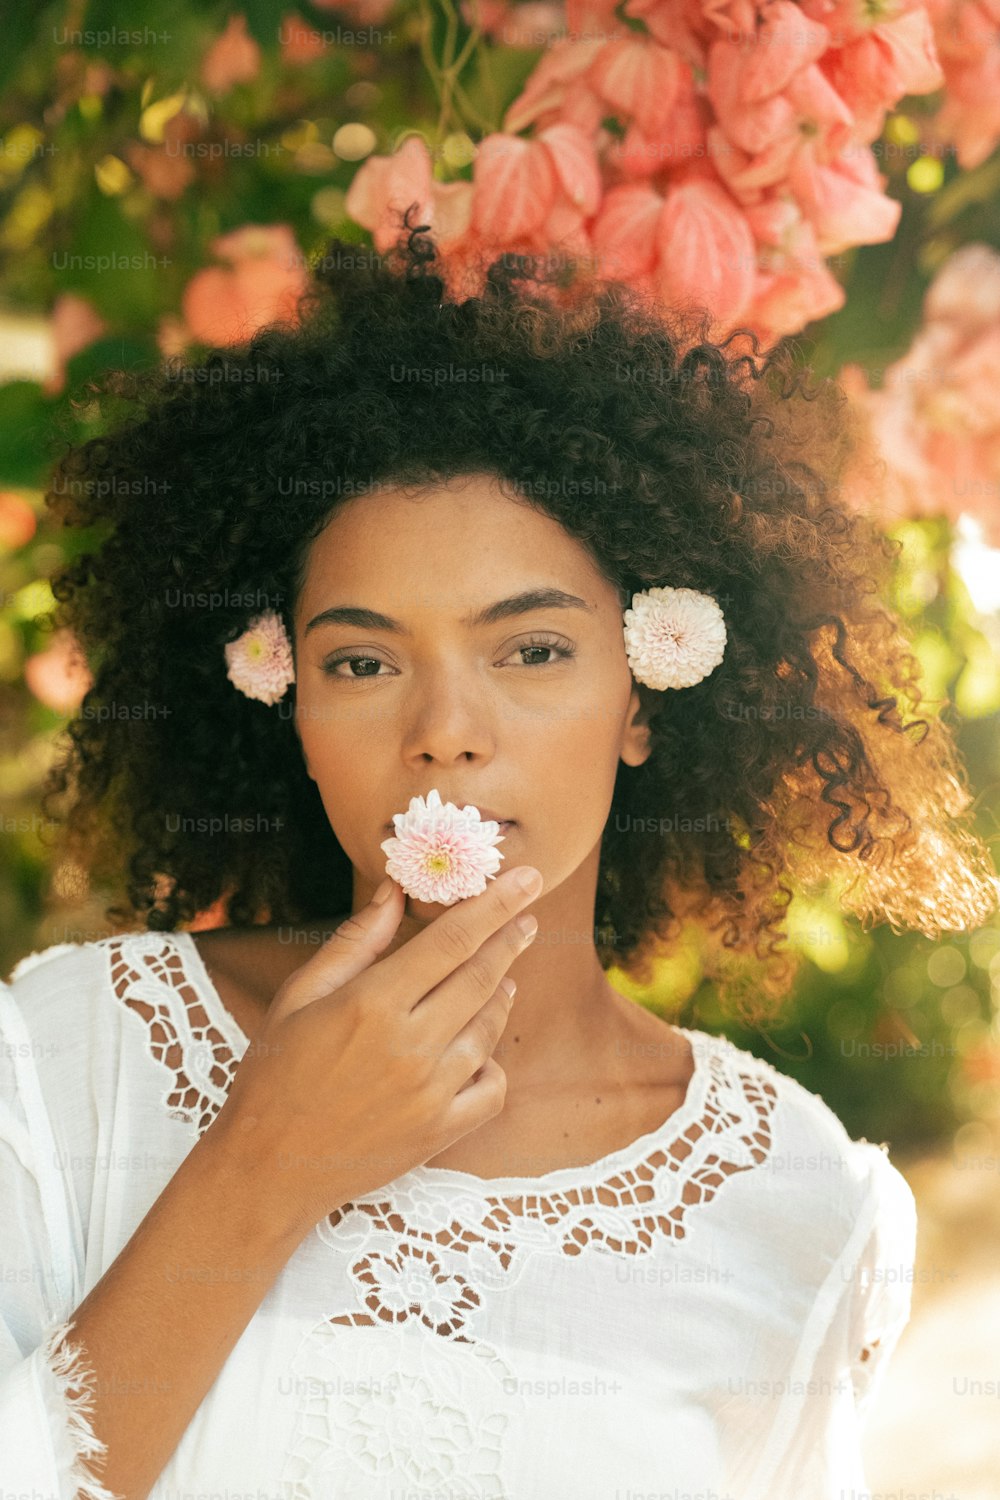 a woman with flowers in her hair blowing her nose